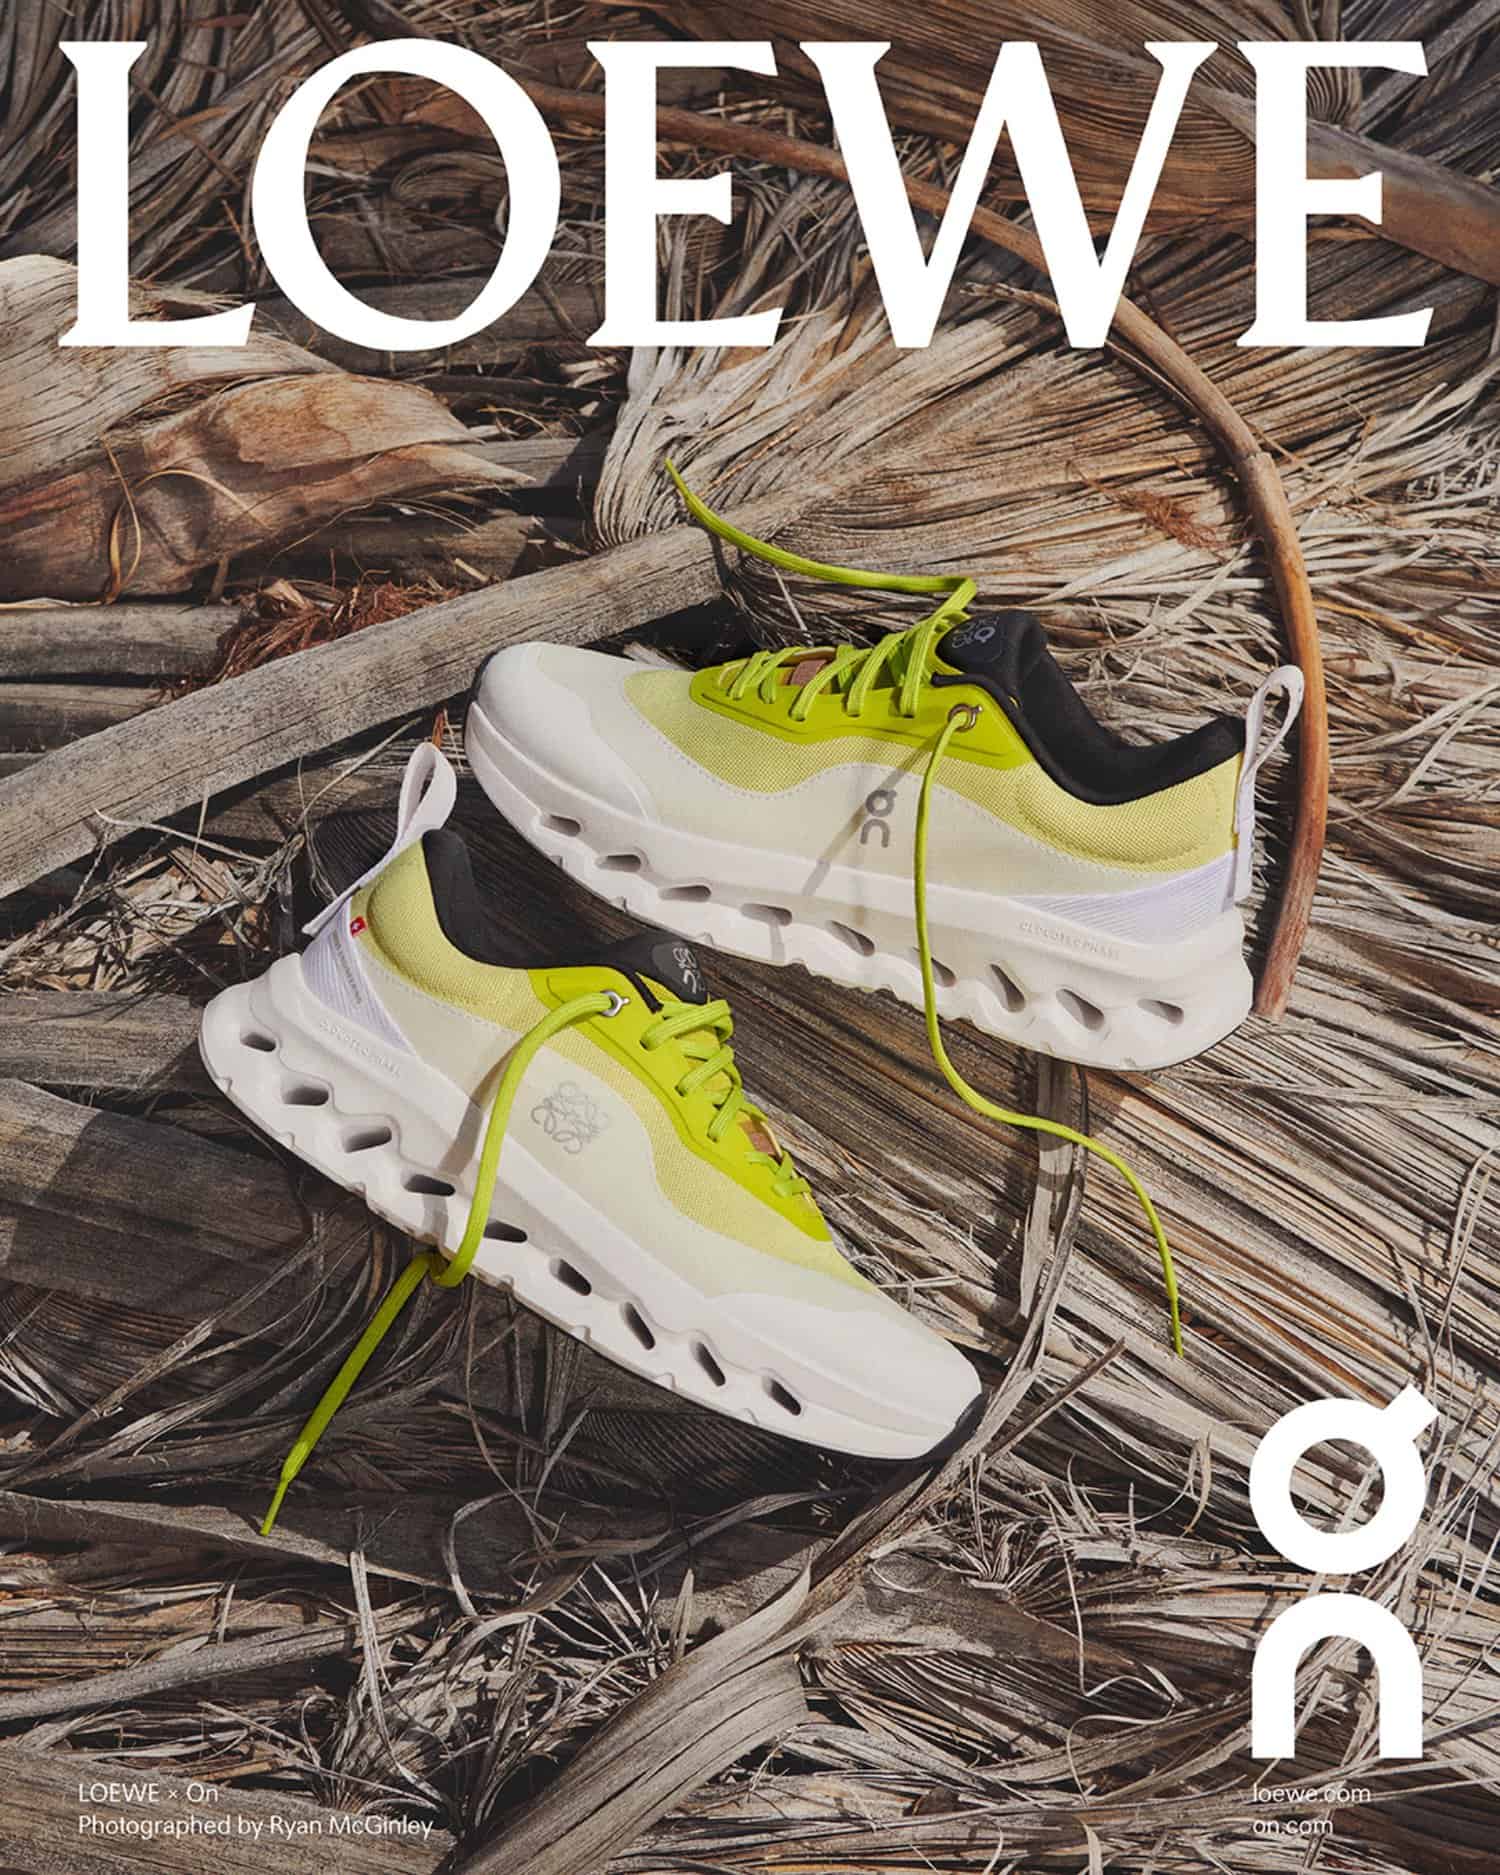 Loewe, ON, On Running, collaborations, campaigns, athletic brands, athletic collaborations